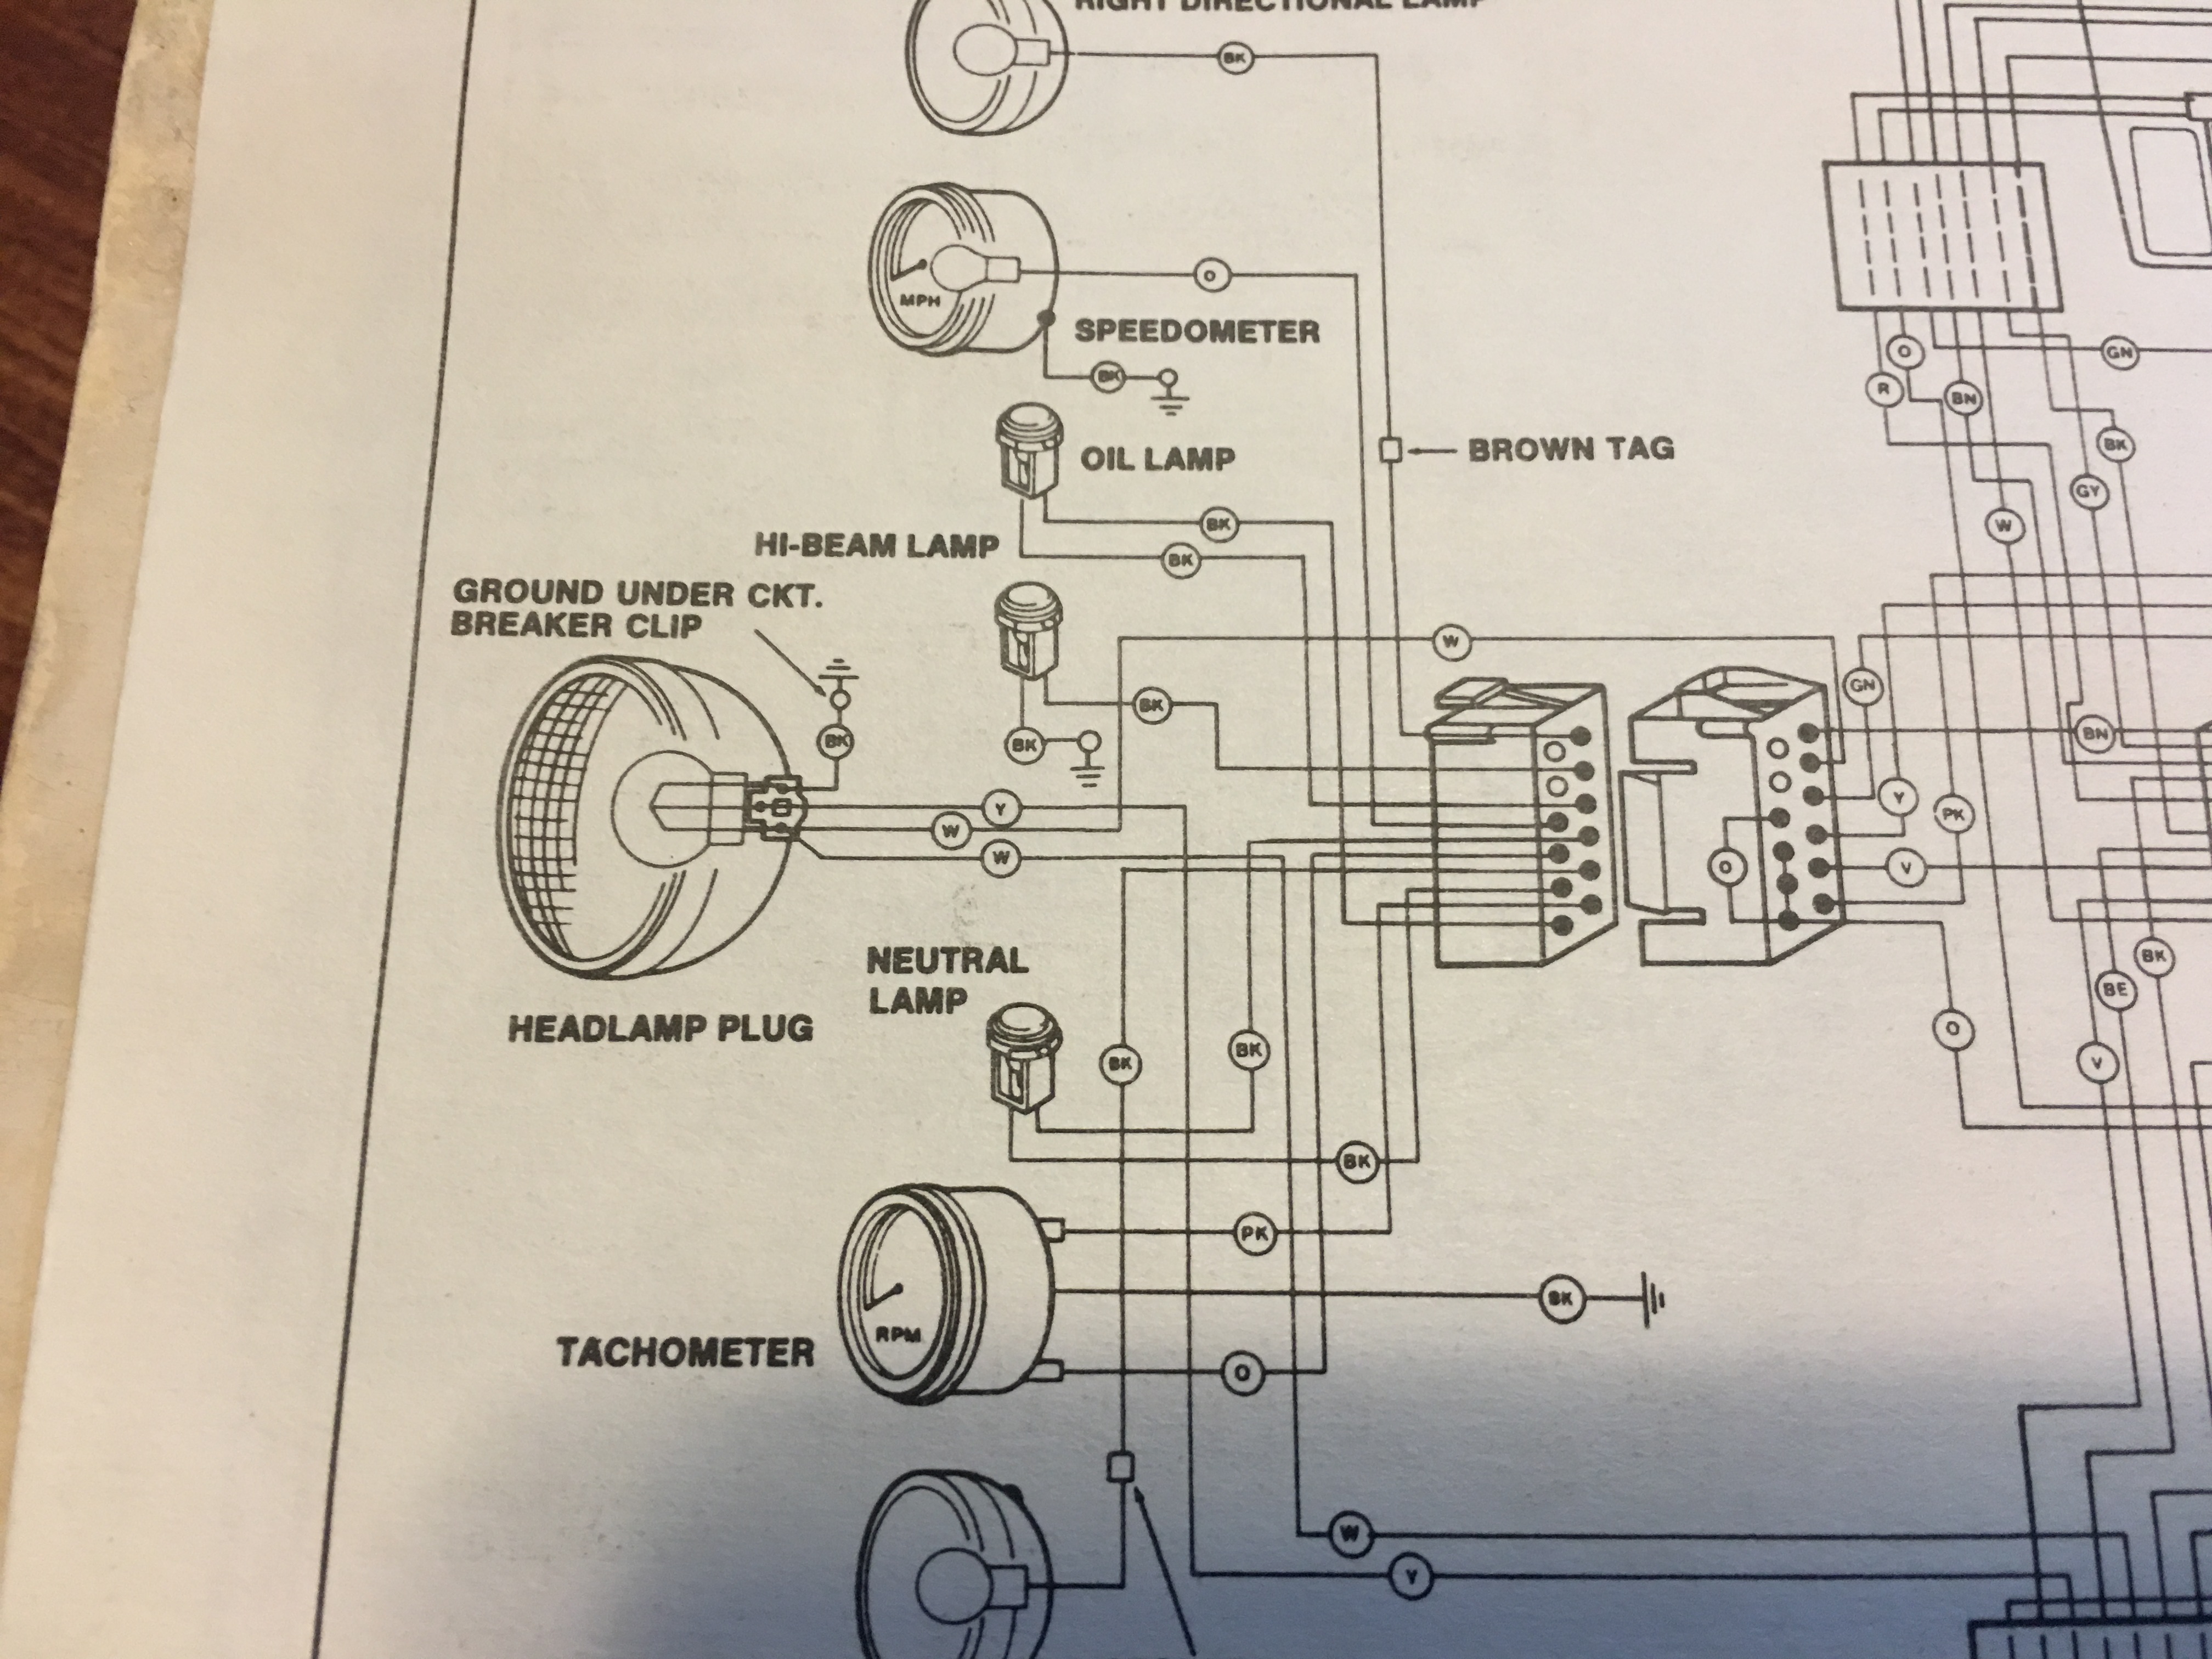 wiring diagram 1982 harley - Wiring Diagram and Schematic